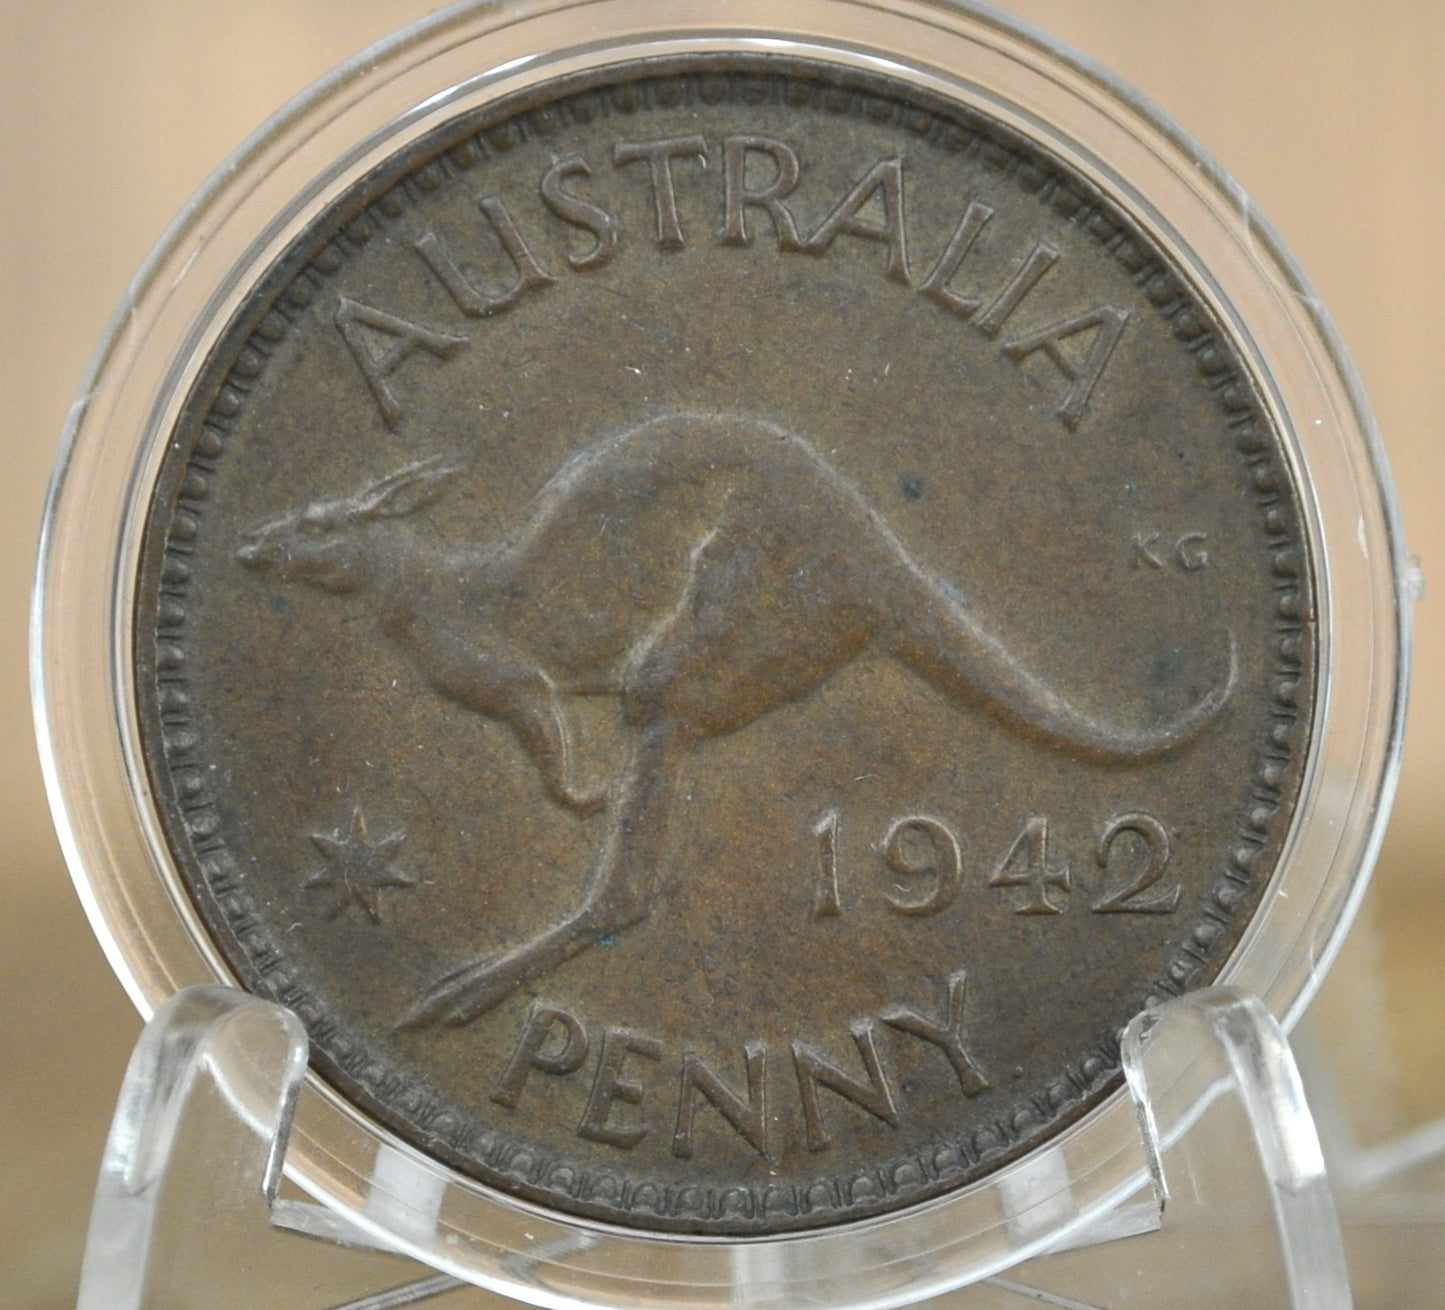 1942 Australia One Penny Australia, Perth Mint - Great Condition / Detail - King George - Collectible Australian Coin